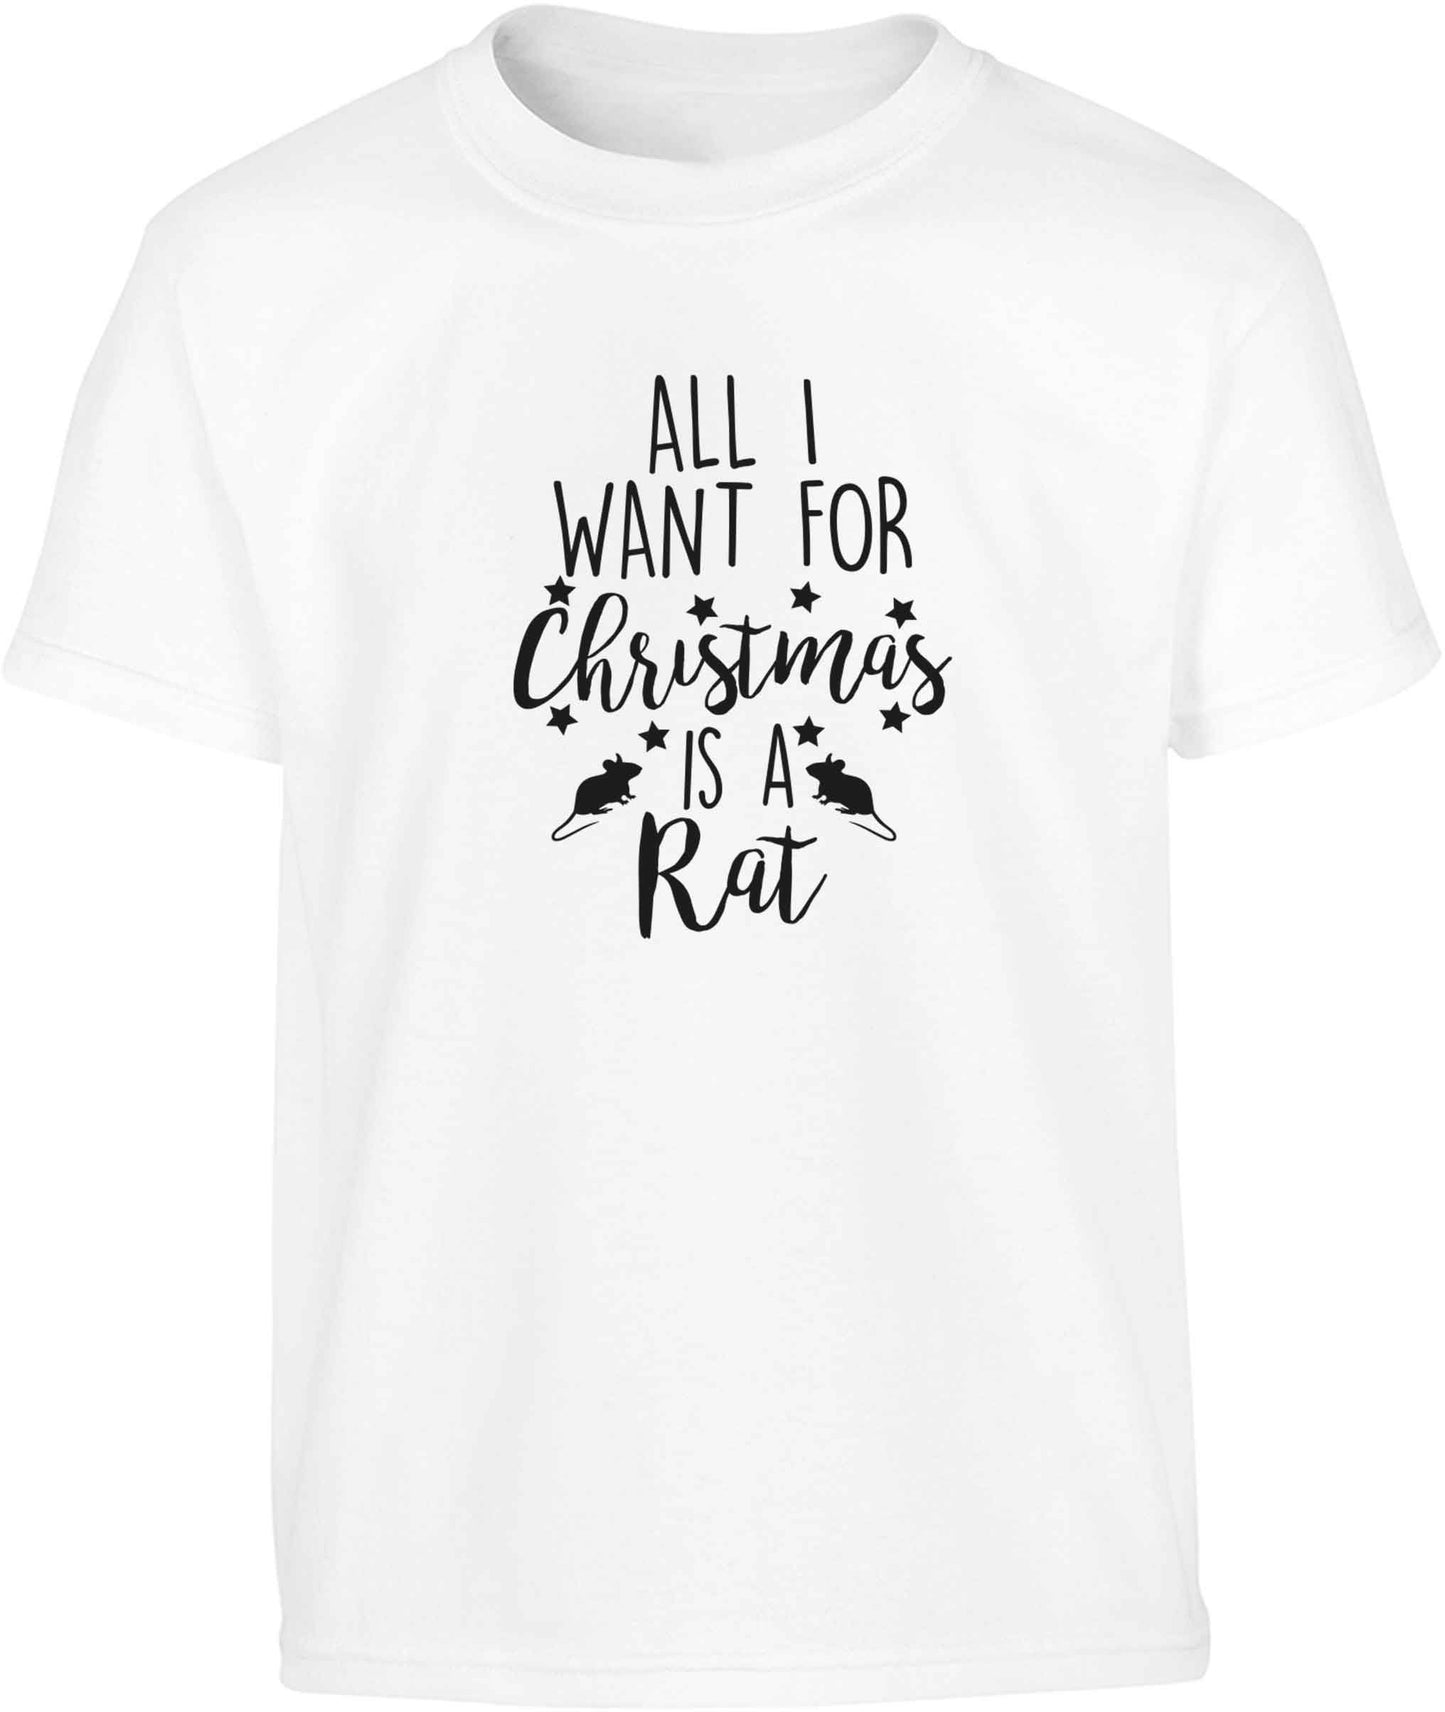 All I want for Christmas is a rat Children's white Tshirt 12-13 Years